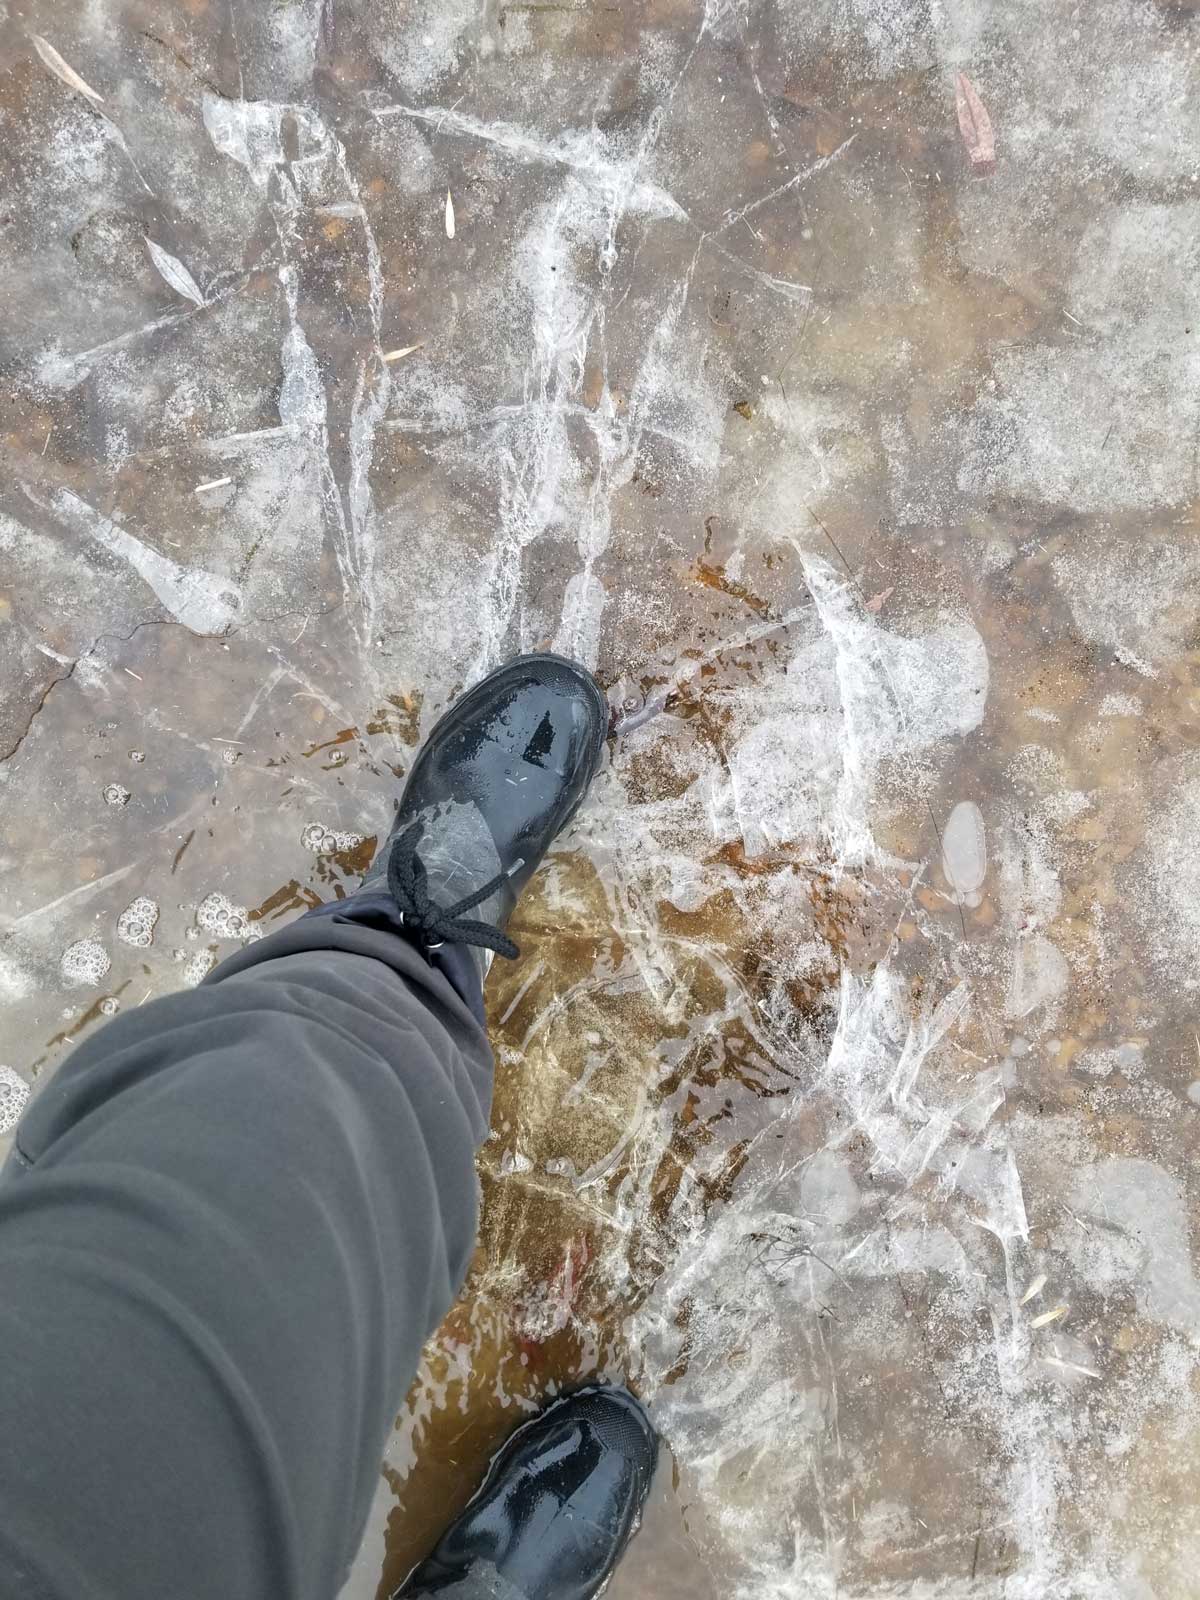 This image shows a boot pushing down onto ice.